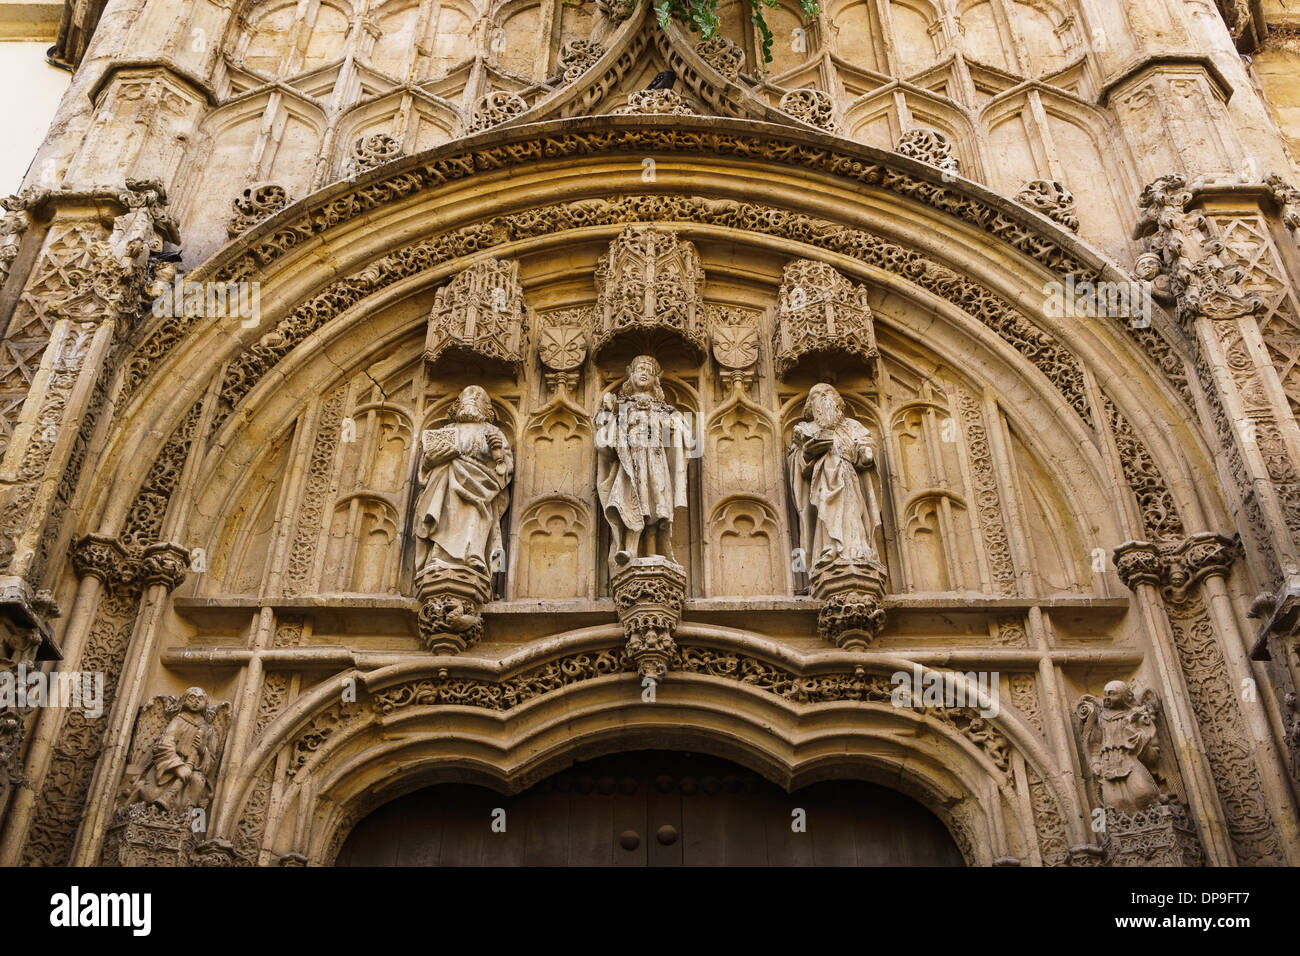 Detail of the facade of the Tourism office and information center of Cordoba Stock Photo